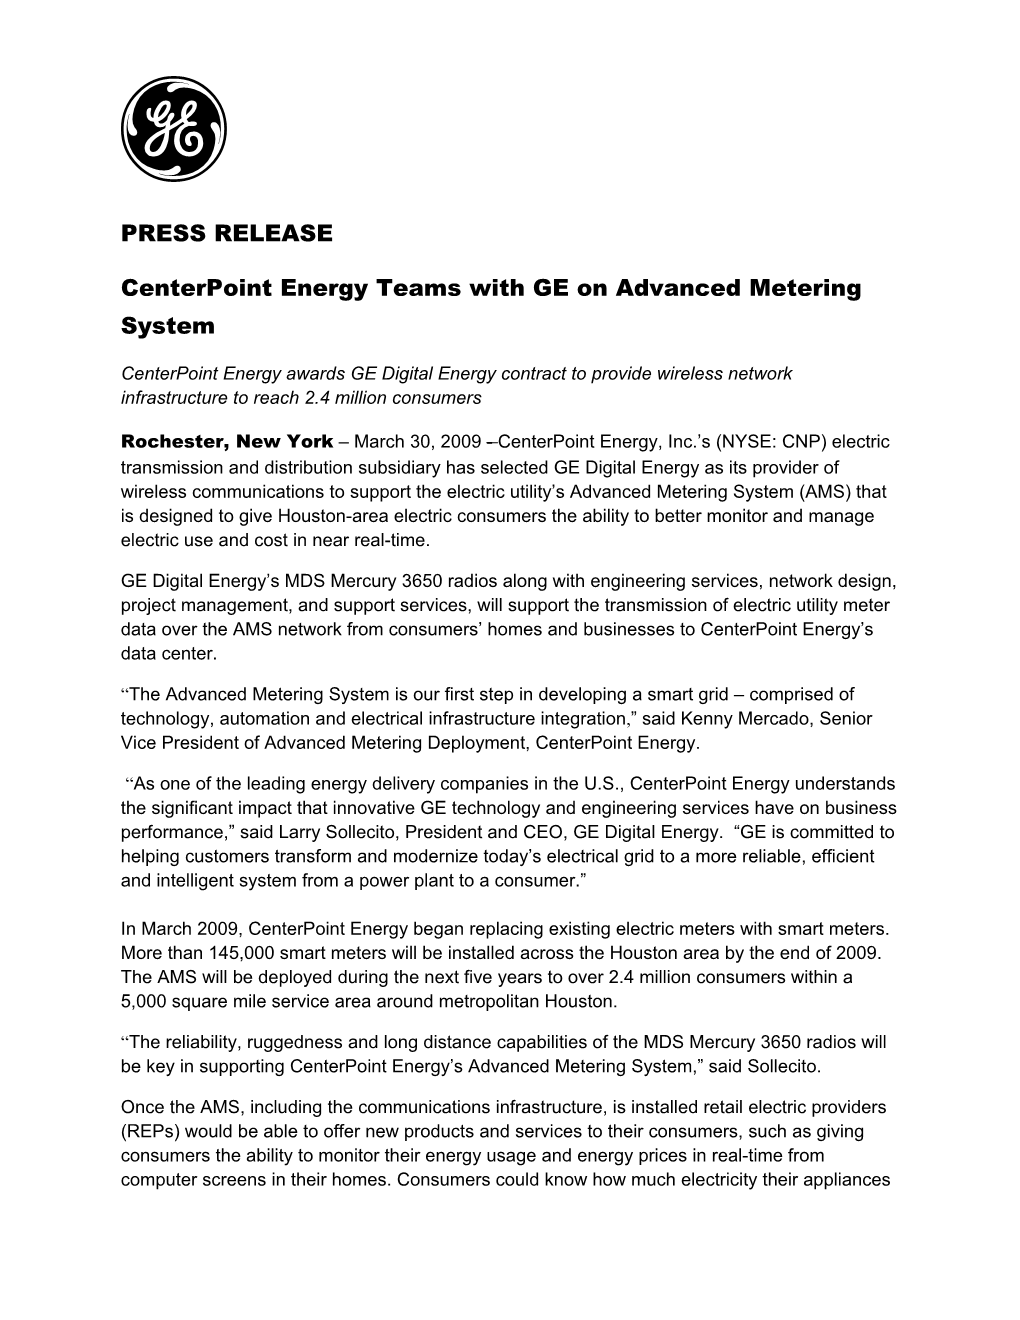 Centerpoint Energy Press Release